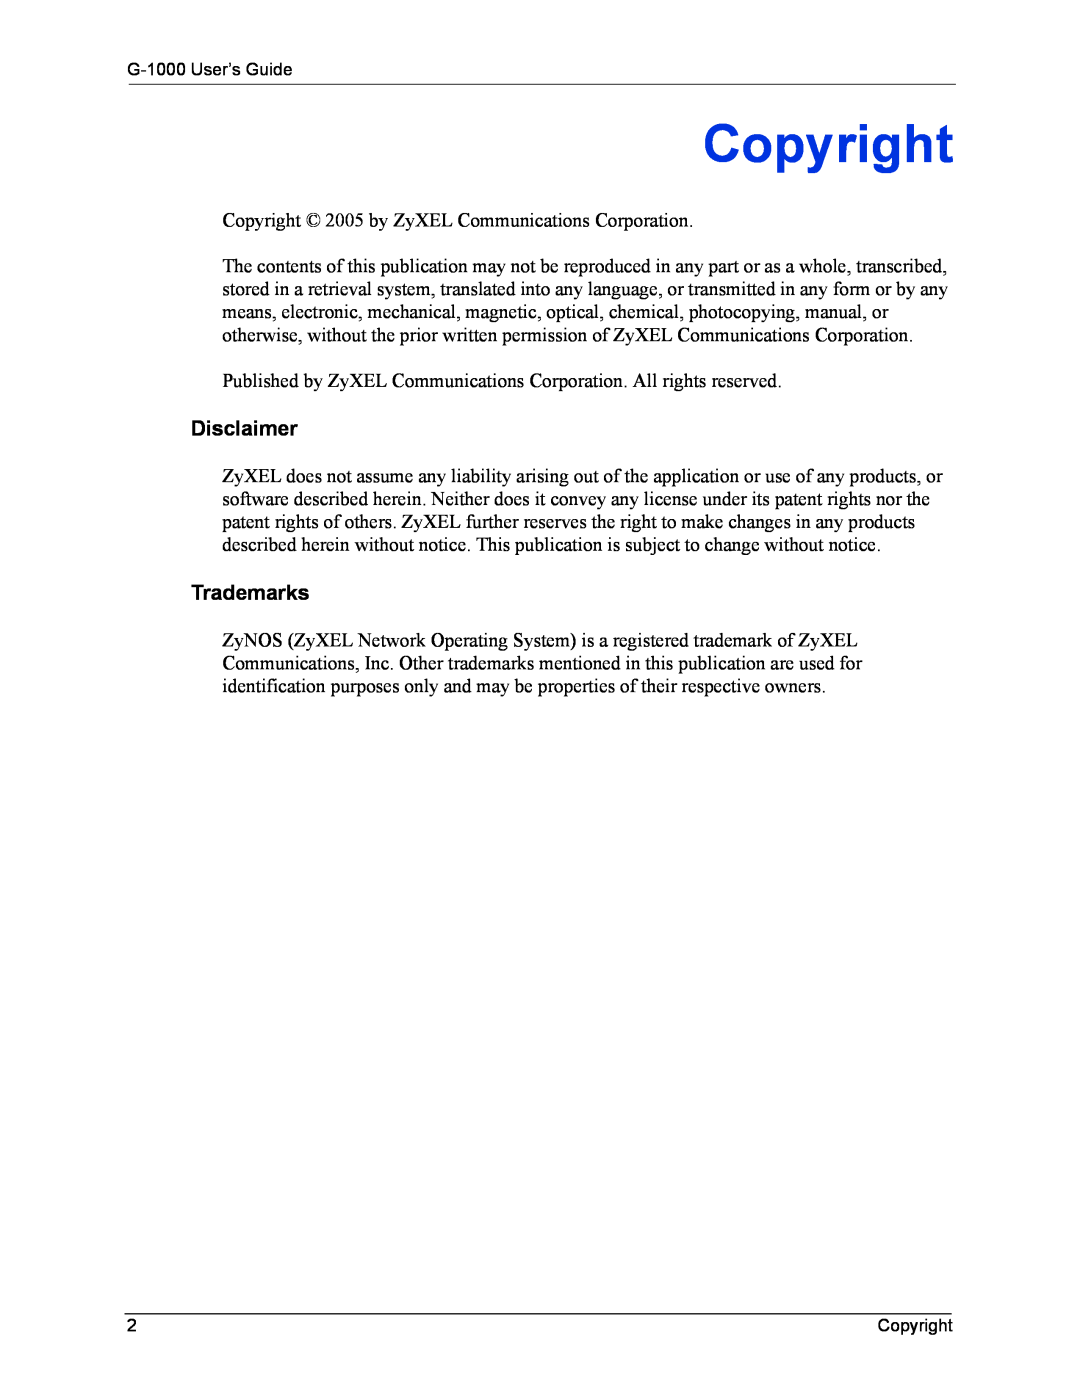 ZyXEL Communications G-1000 manual Copyright, Disclaimer, Trademarks 